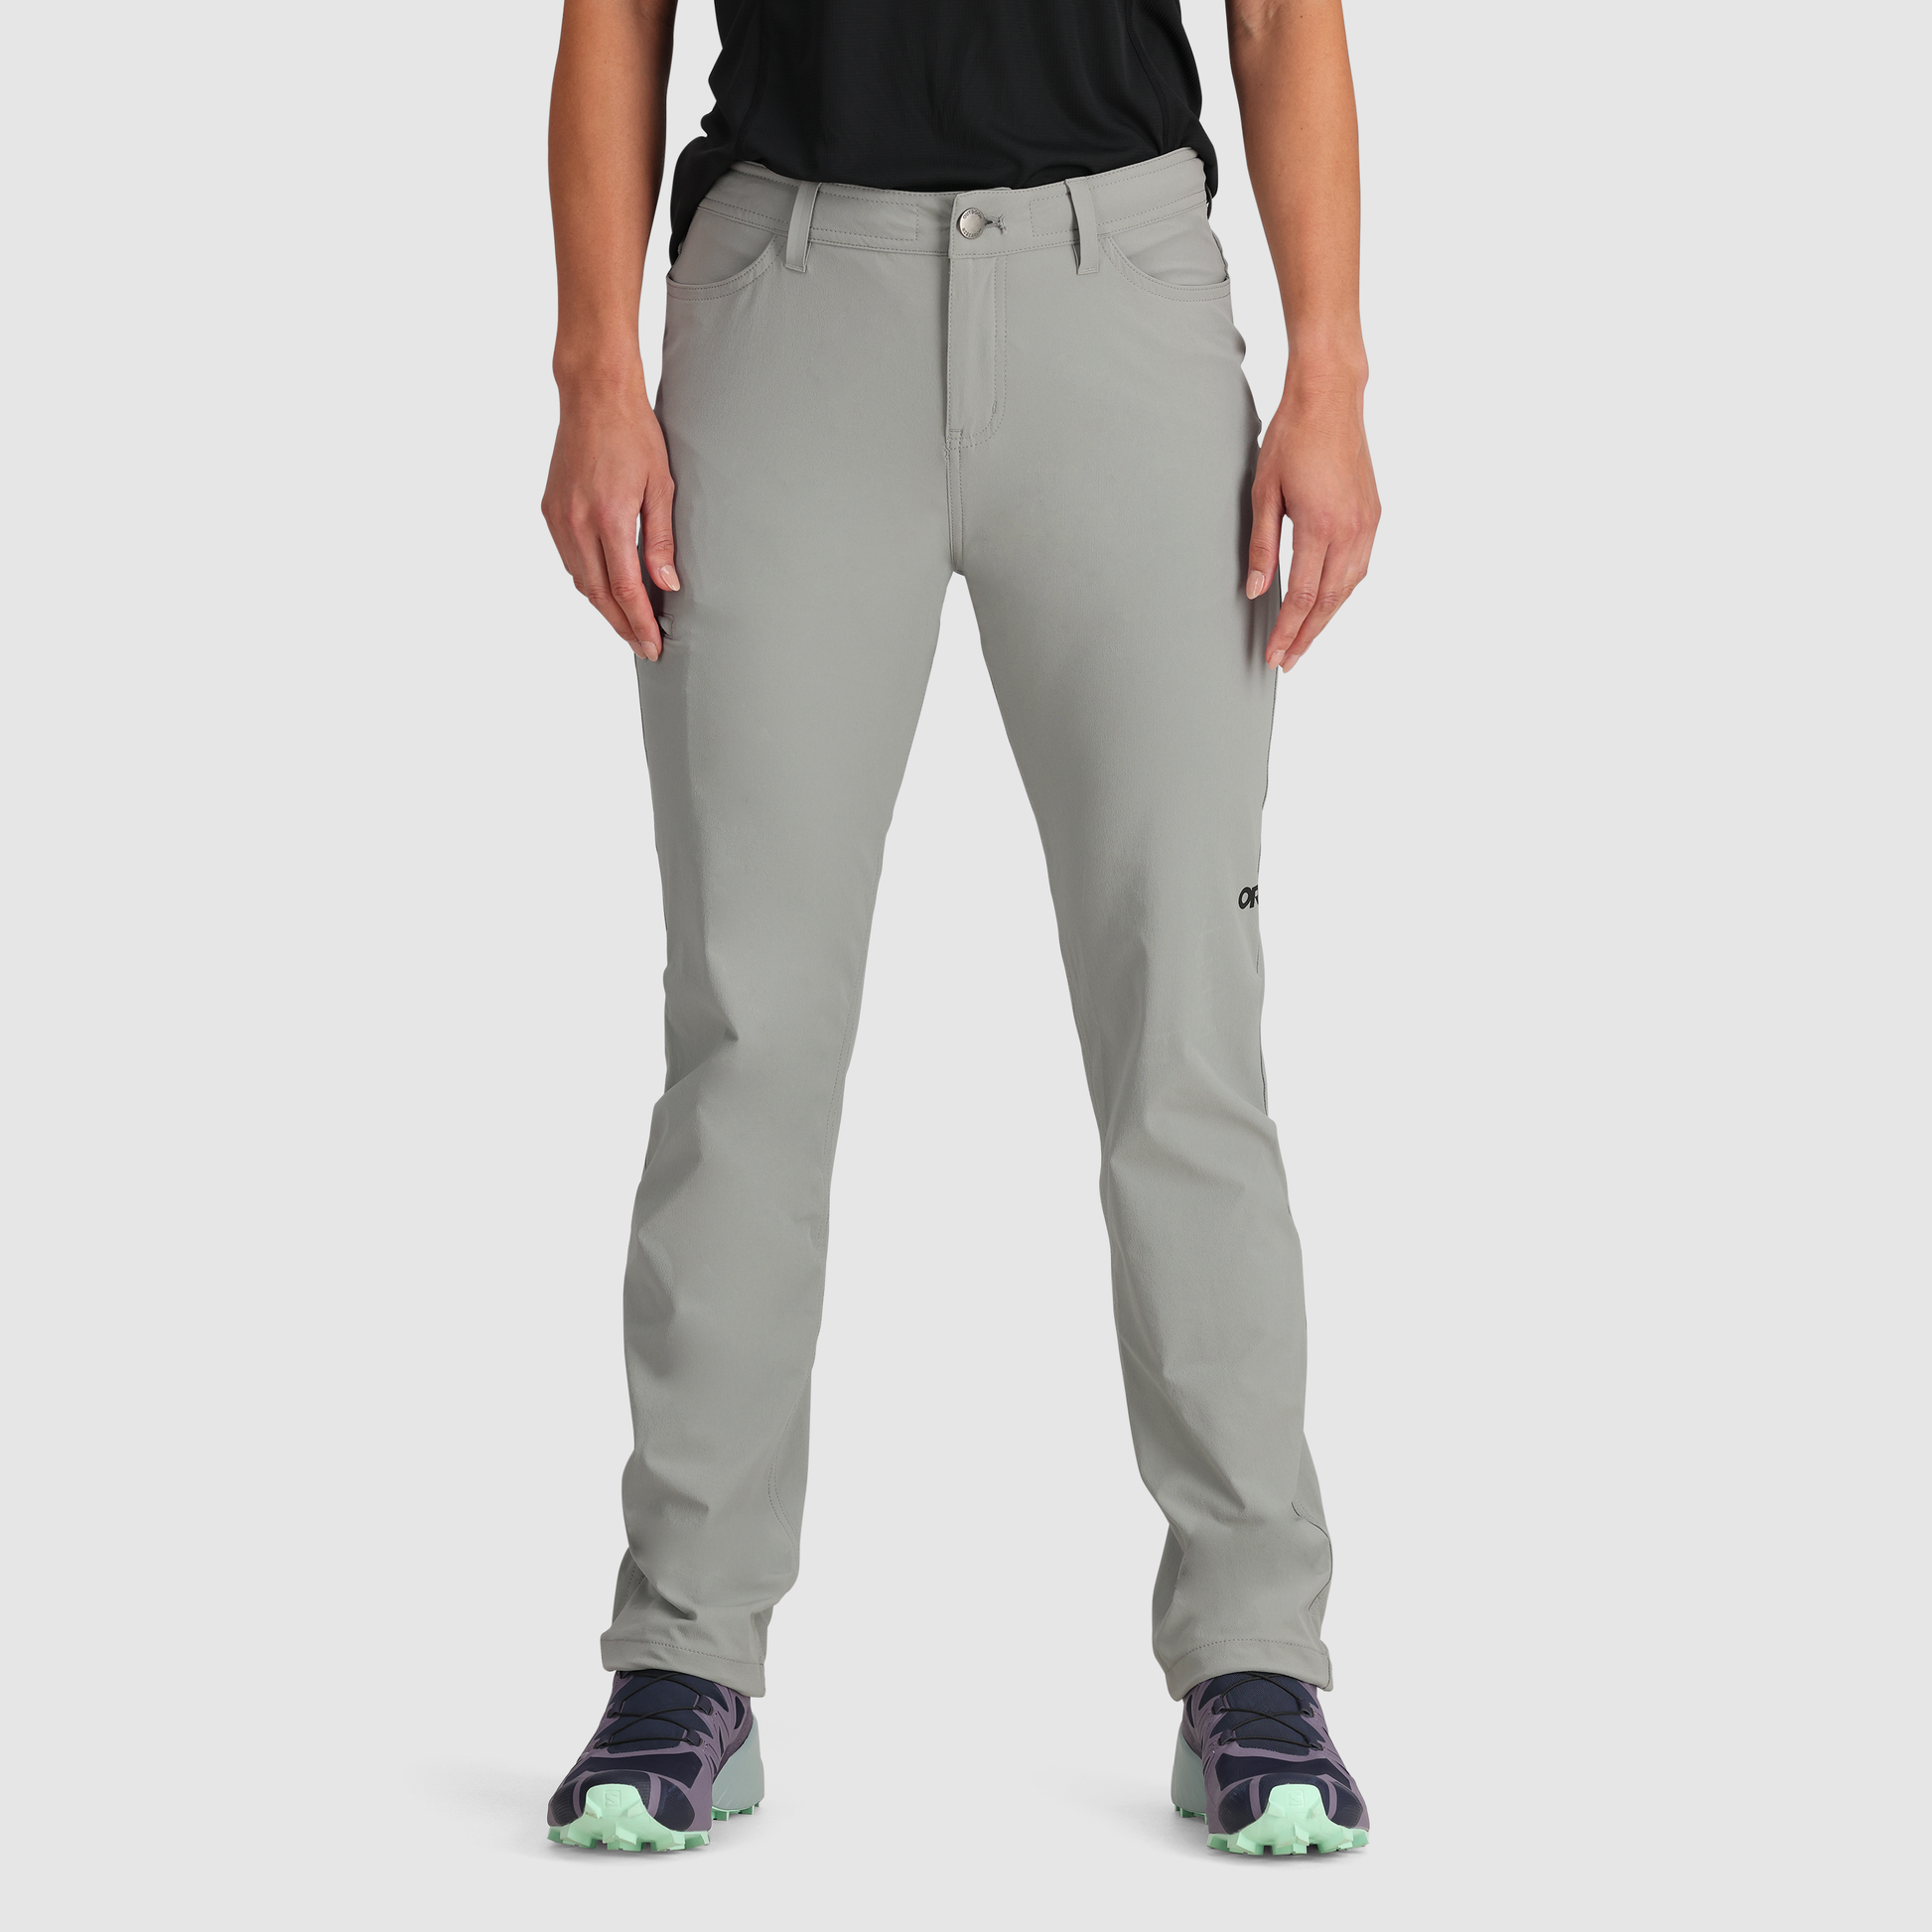 Outdoor Research Ferrosi Convertible Pants, 34 Inseam - Mens, FREE  SHIPPING in Canada